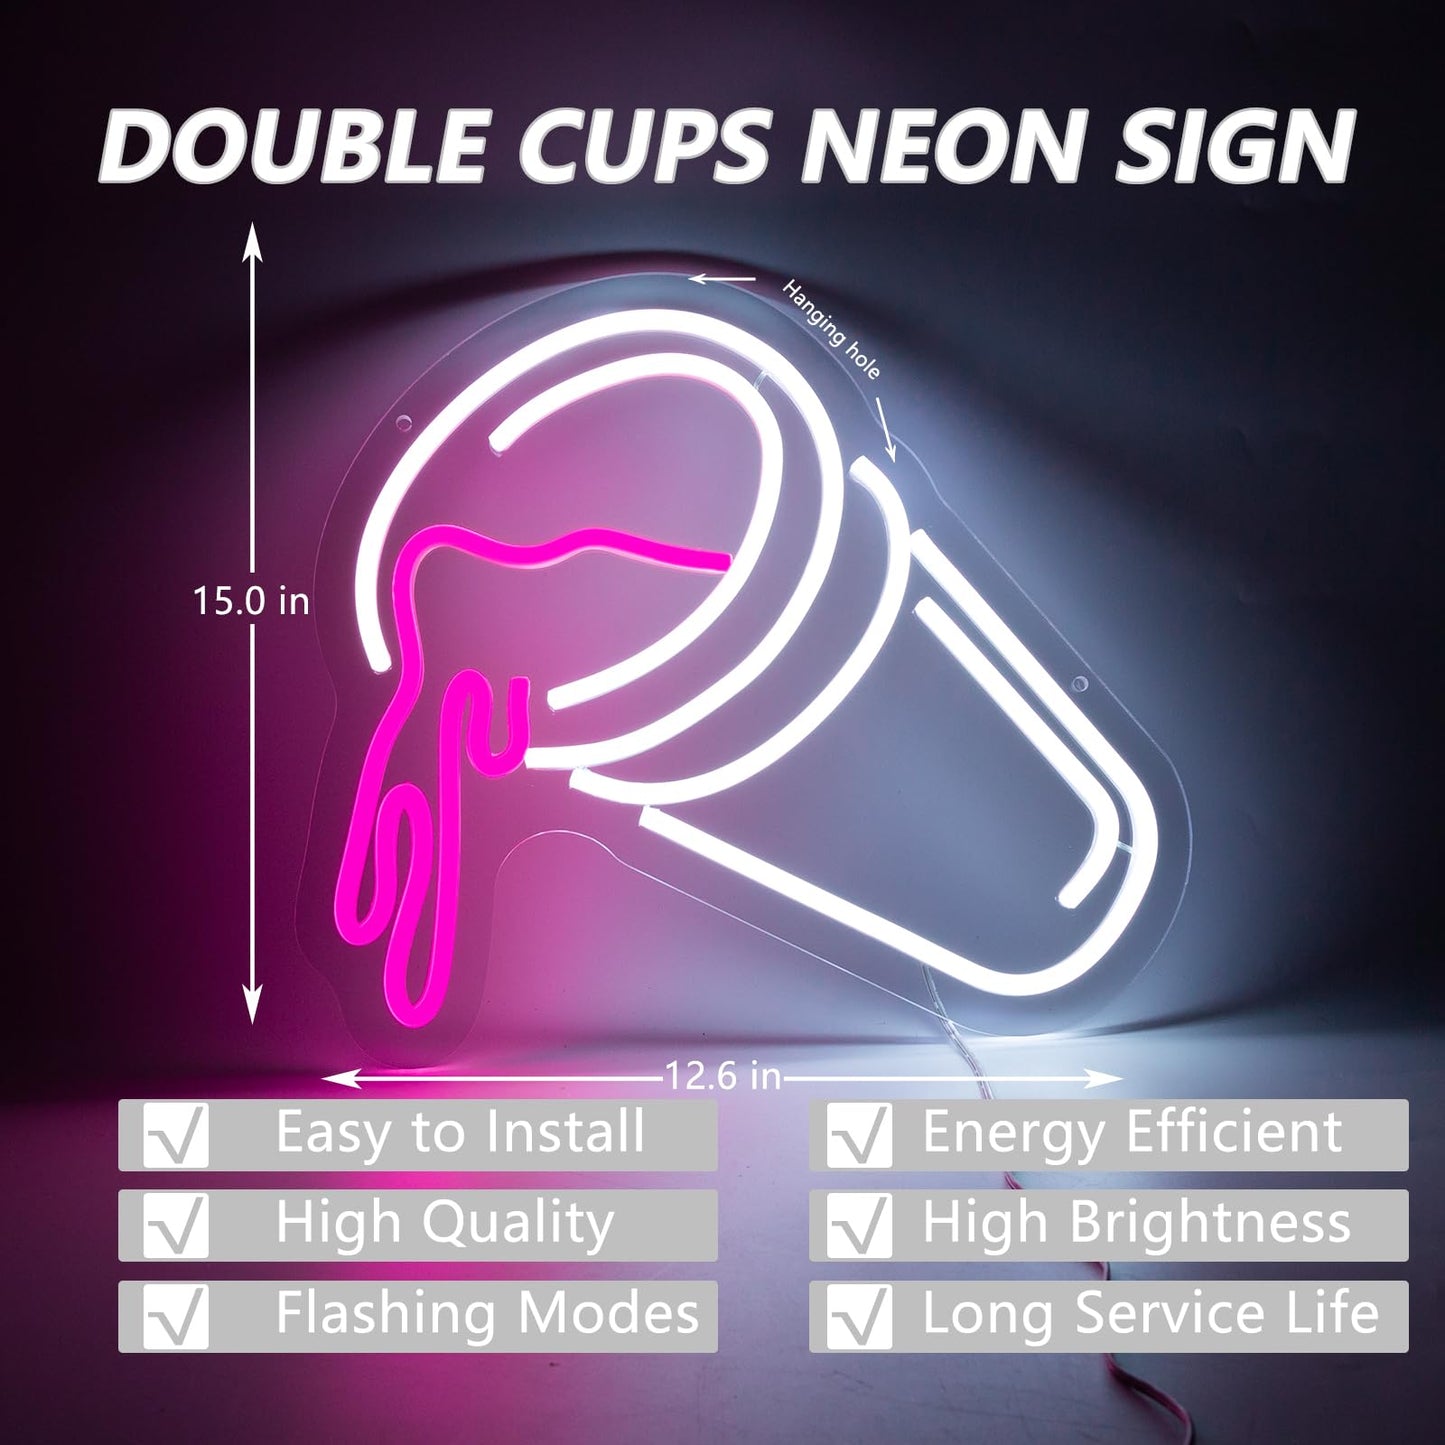 Double Cups Neon Sign